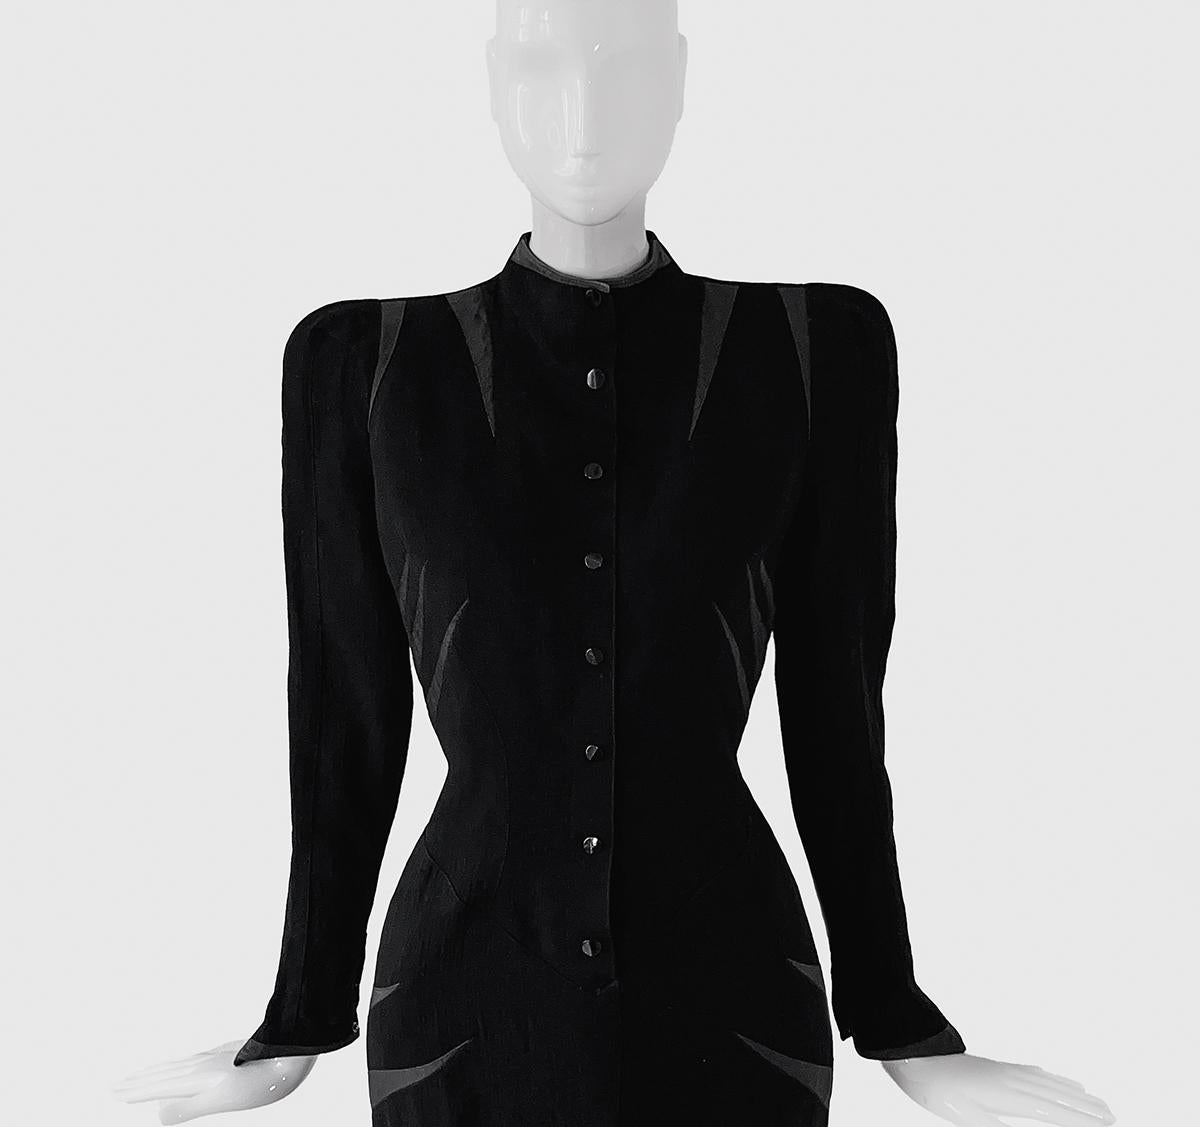 Rare Thierry Mugler SS 1988 Dress Black Iconic Dramatic Collectors Piece  For Sale 2